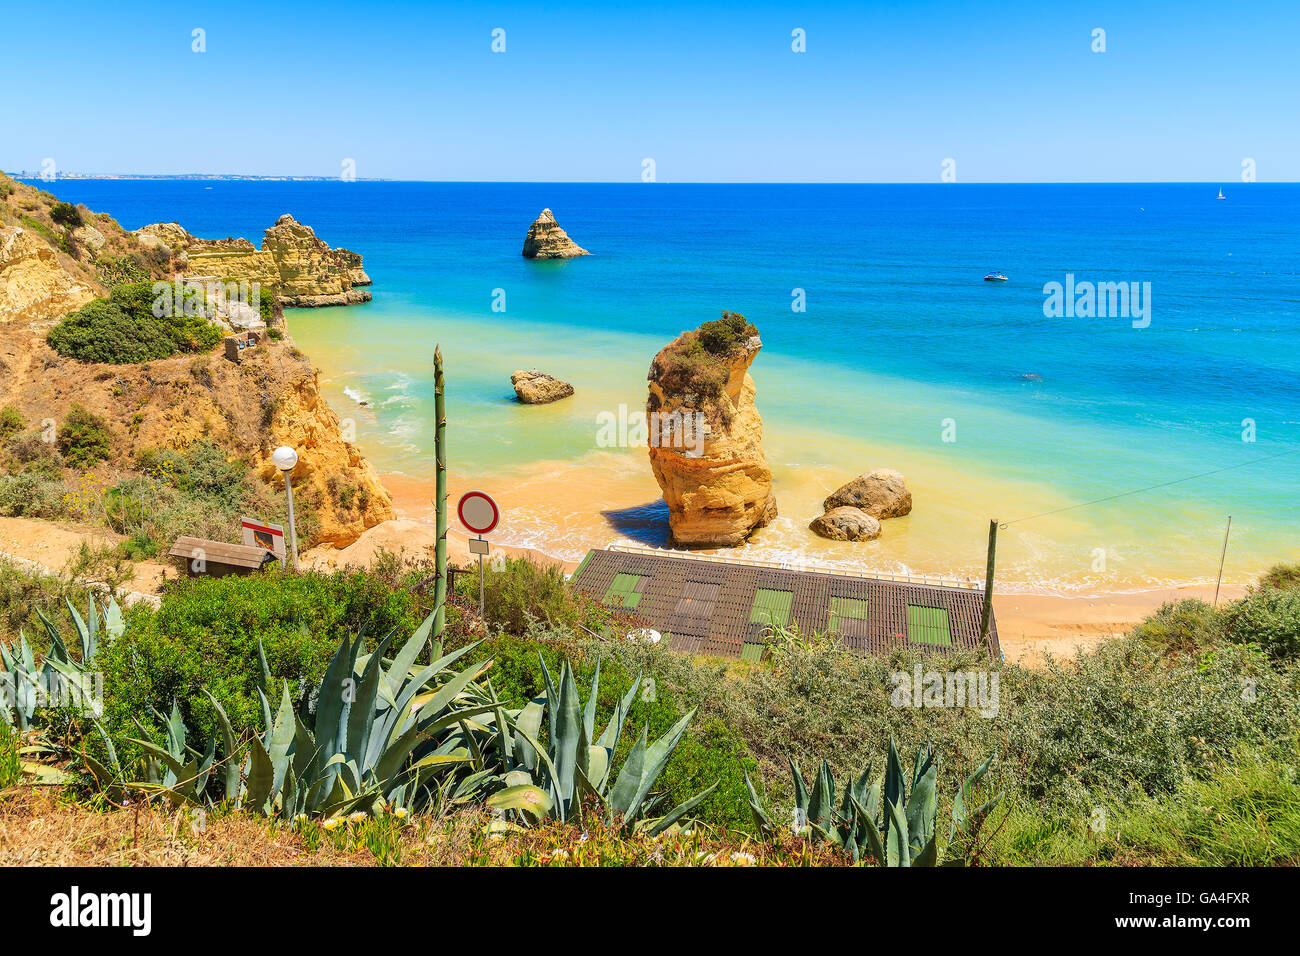 View of famous Praia Dona Ana beach with turquoise sea water and cliffs, Portugal Stock Photo